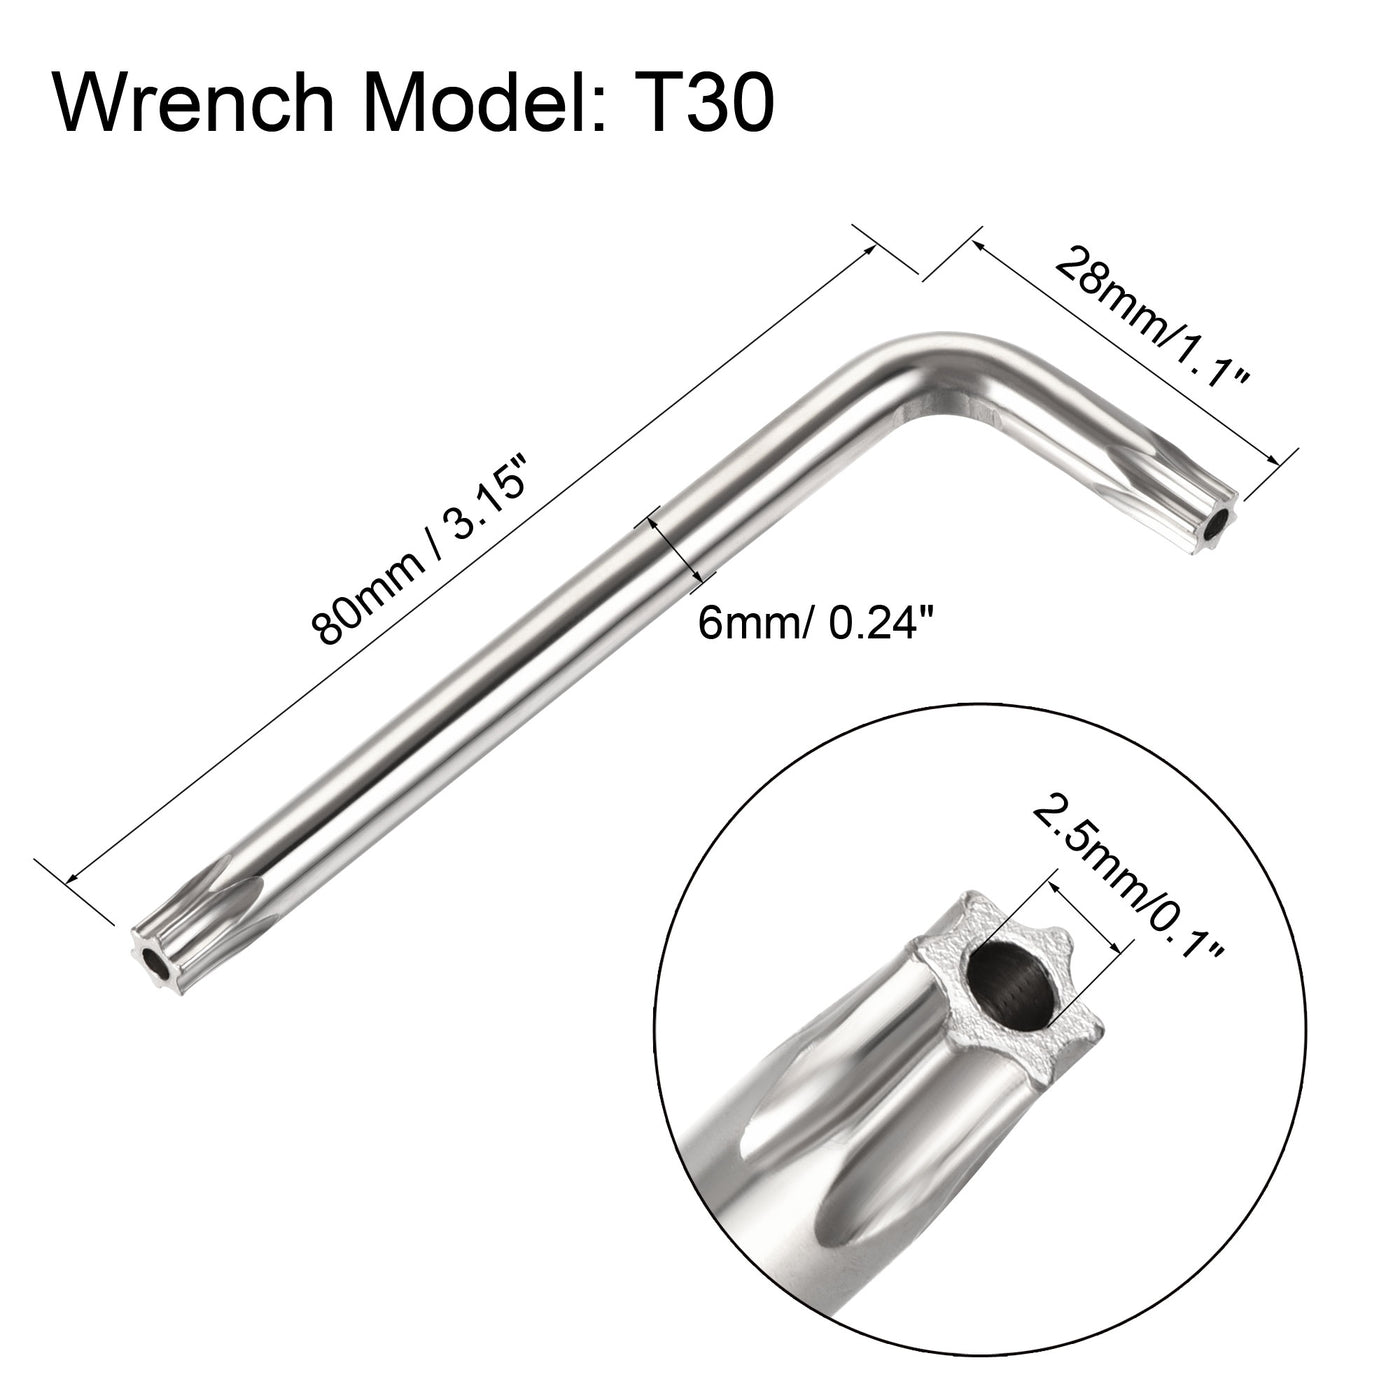 uxcell Uxcell M6x25mm Torx Security Machine Screw, 20pcs Pan Head Screws Inside Column, with T30 L-Type Wrench, 304 Stainless Steel Fasteners Bolts